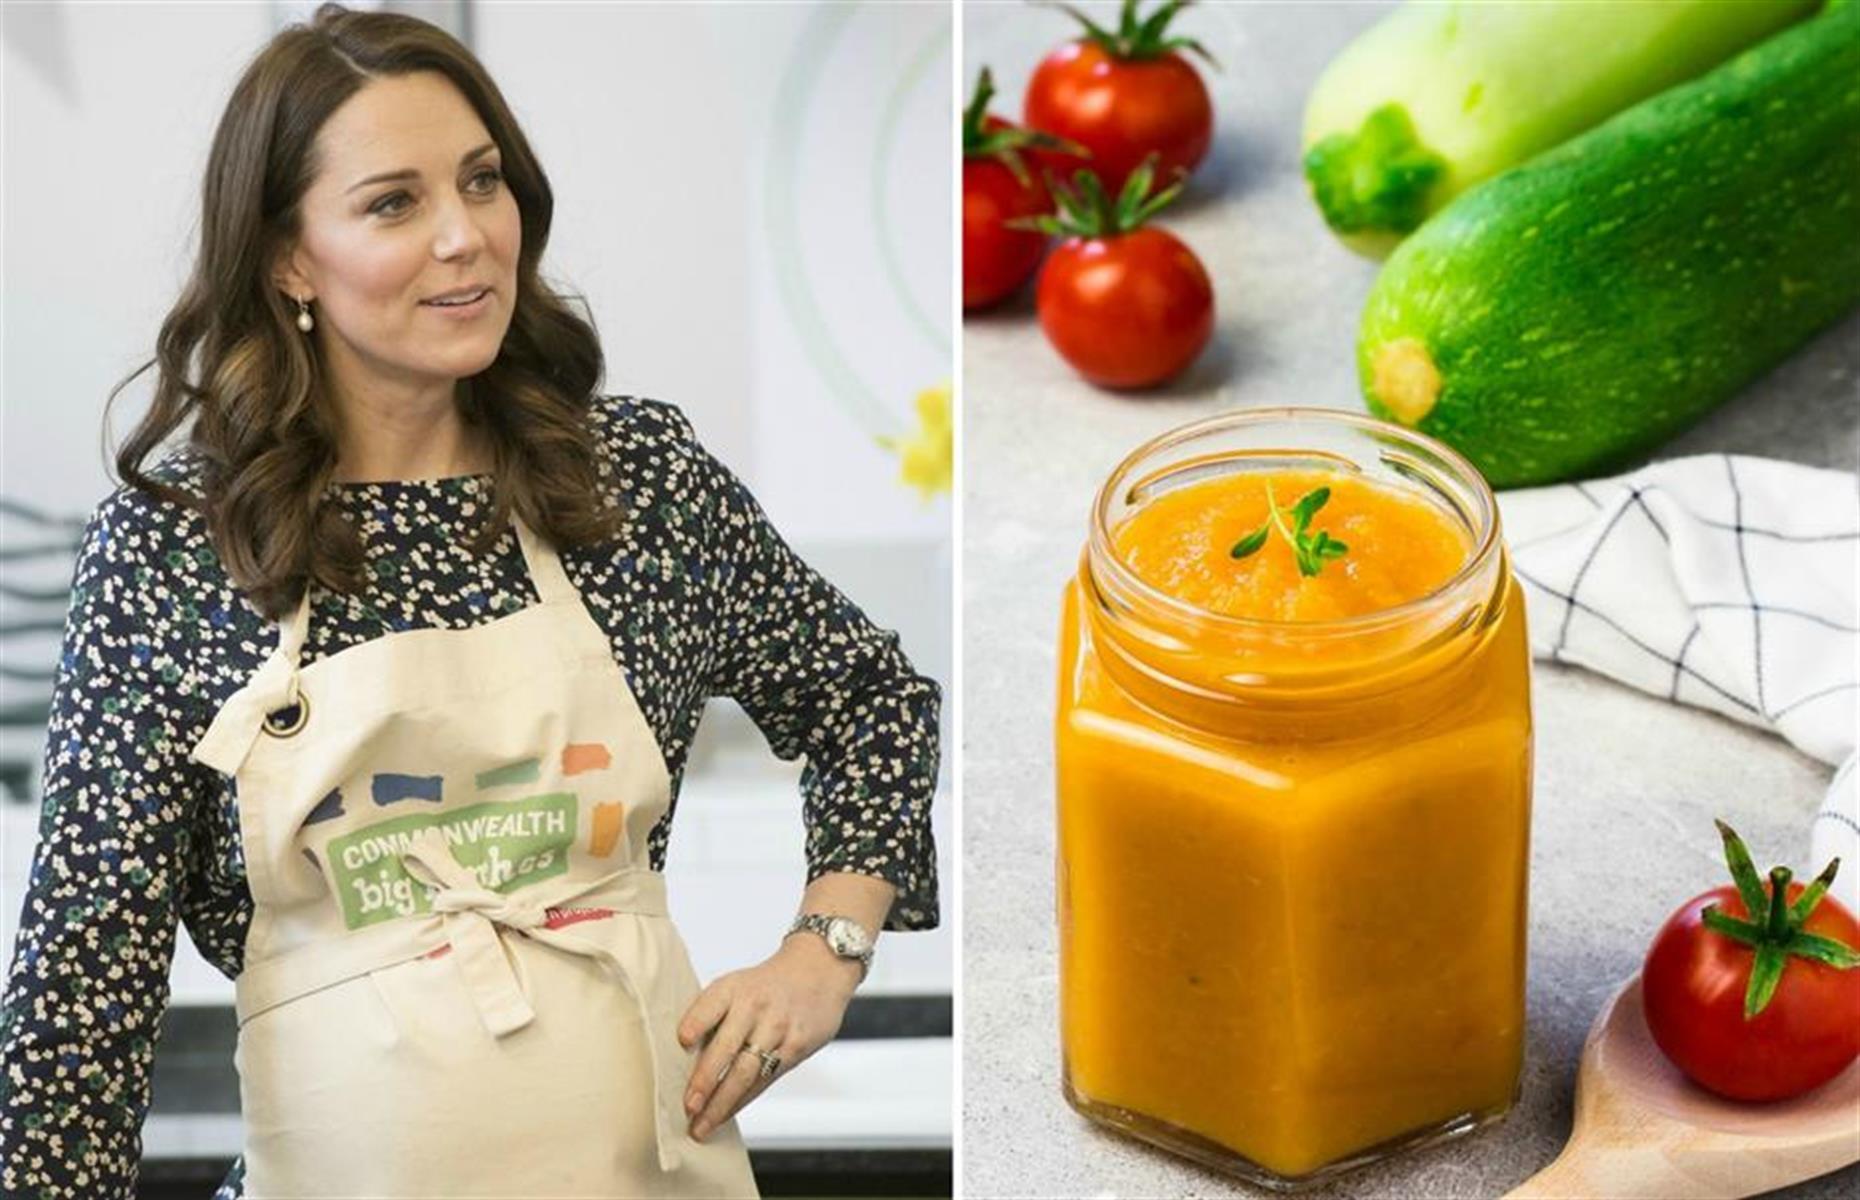 <p>During her first Christmas at Sandringham in 2011, Kate Middleton (then Duchess of Cambridge) was understandably anxious about what to give to the Queen. In the end, she opted for a thoughtful homemade gift: a jar of marrow chutney. Kate told an ITV documentary: "I thought, 'I'll make her something', which could have gone horribly wrong. But I decided to make my granny's recipe of chutney". She was delighted to spot it on the dining table the next day.</p>